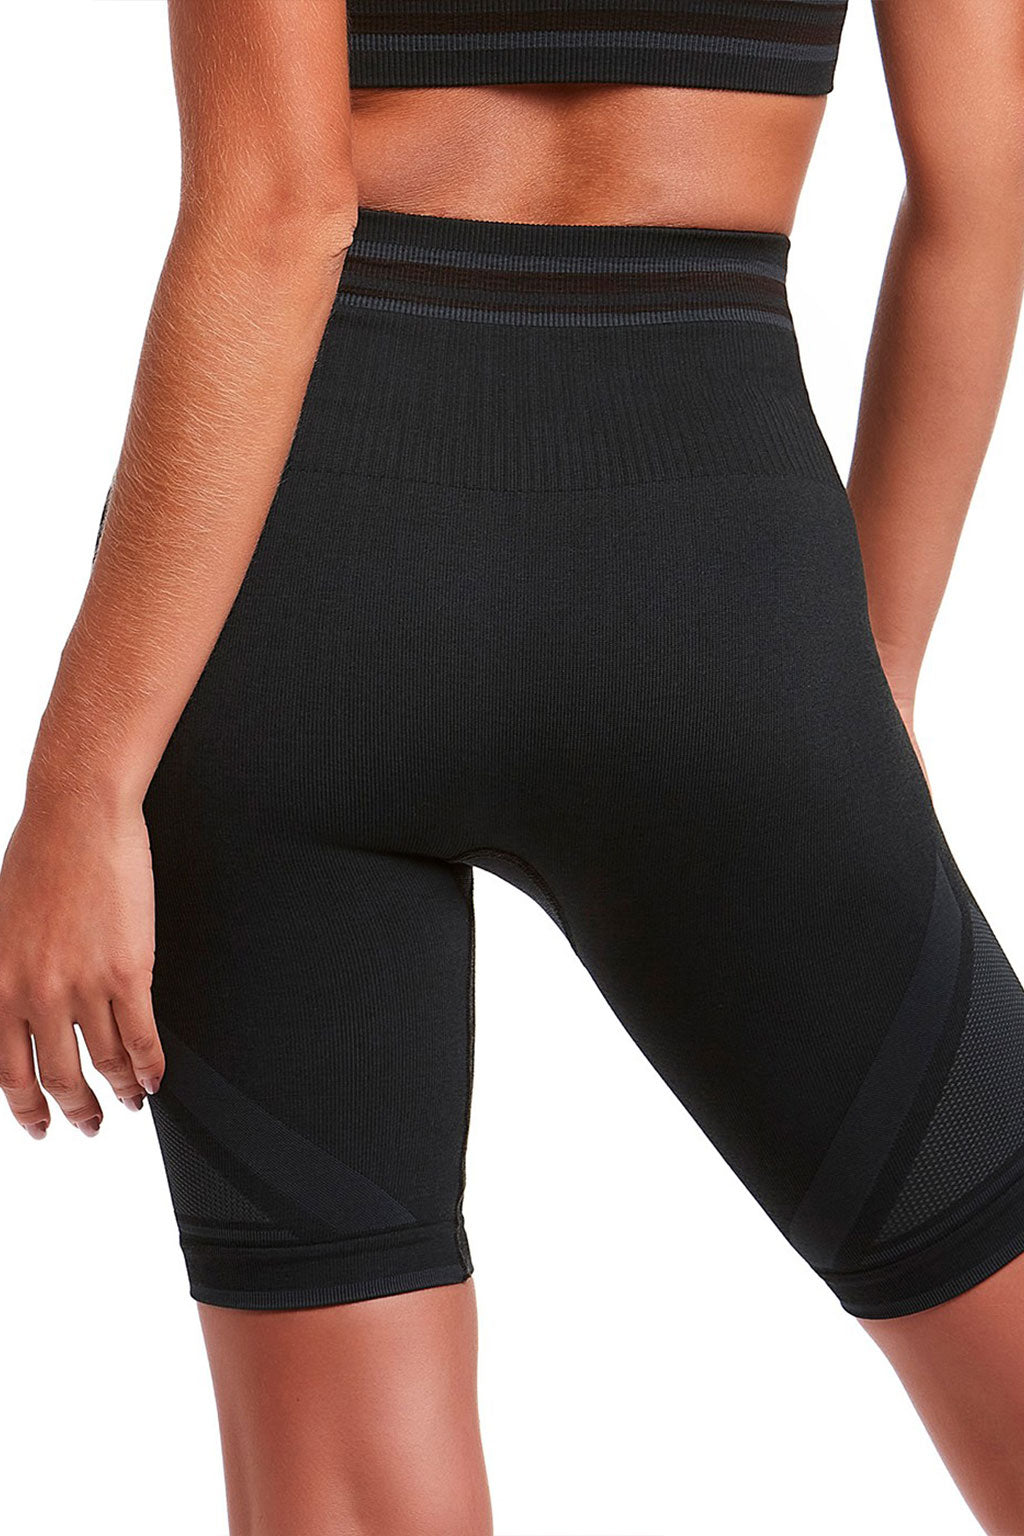 BASIC Fusion style Sport Bermuda with double and versatile waistband